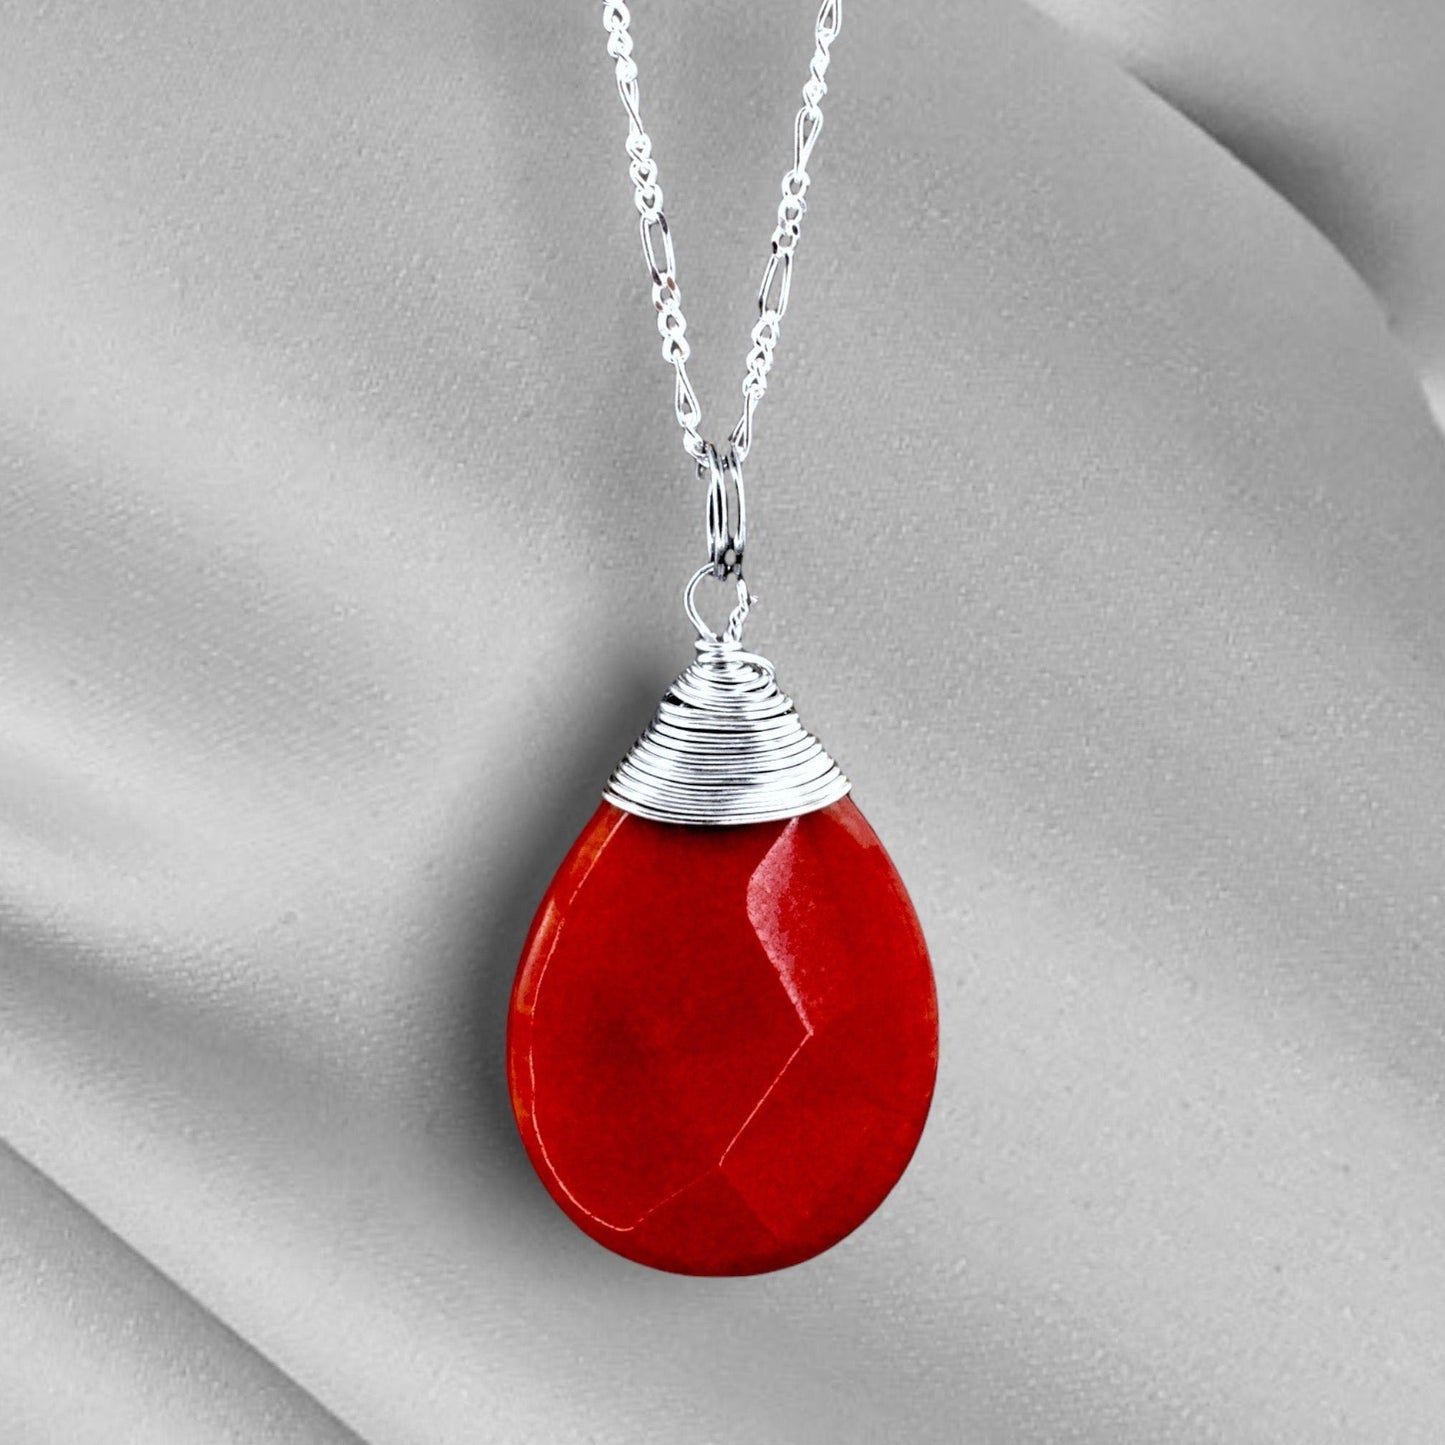 Jade Drop Silver Chain - 925 Sterling Granat Crystal Red Gem Necklace - K925-42